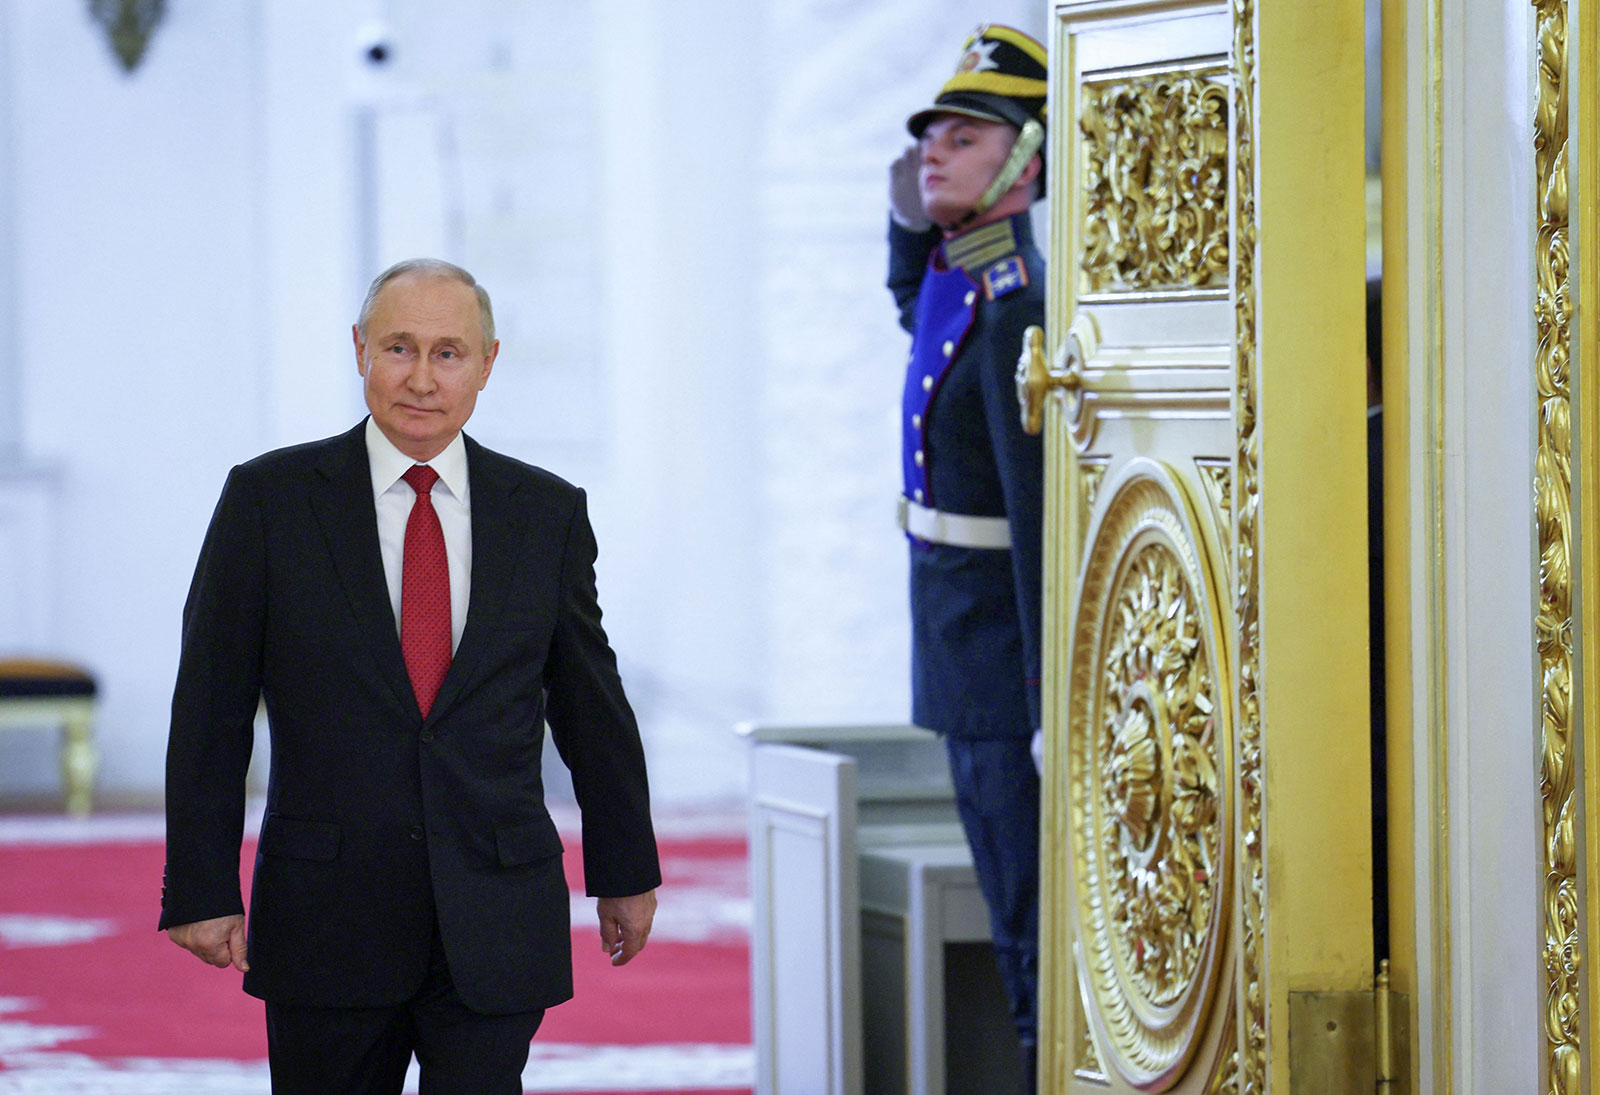 Russian President Vladimir Putin arrives for a meeting with graduates from Russia's military academies at the Kremlin in Moscow on June 21.